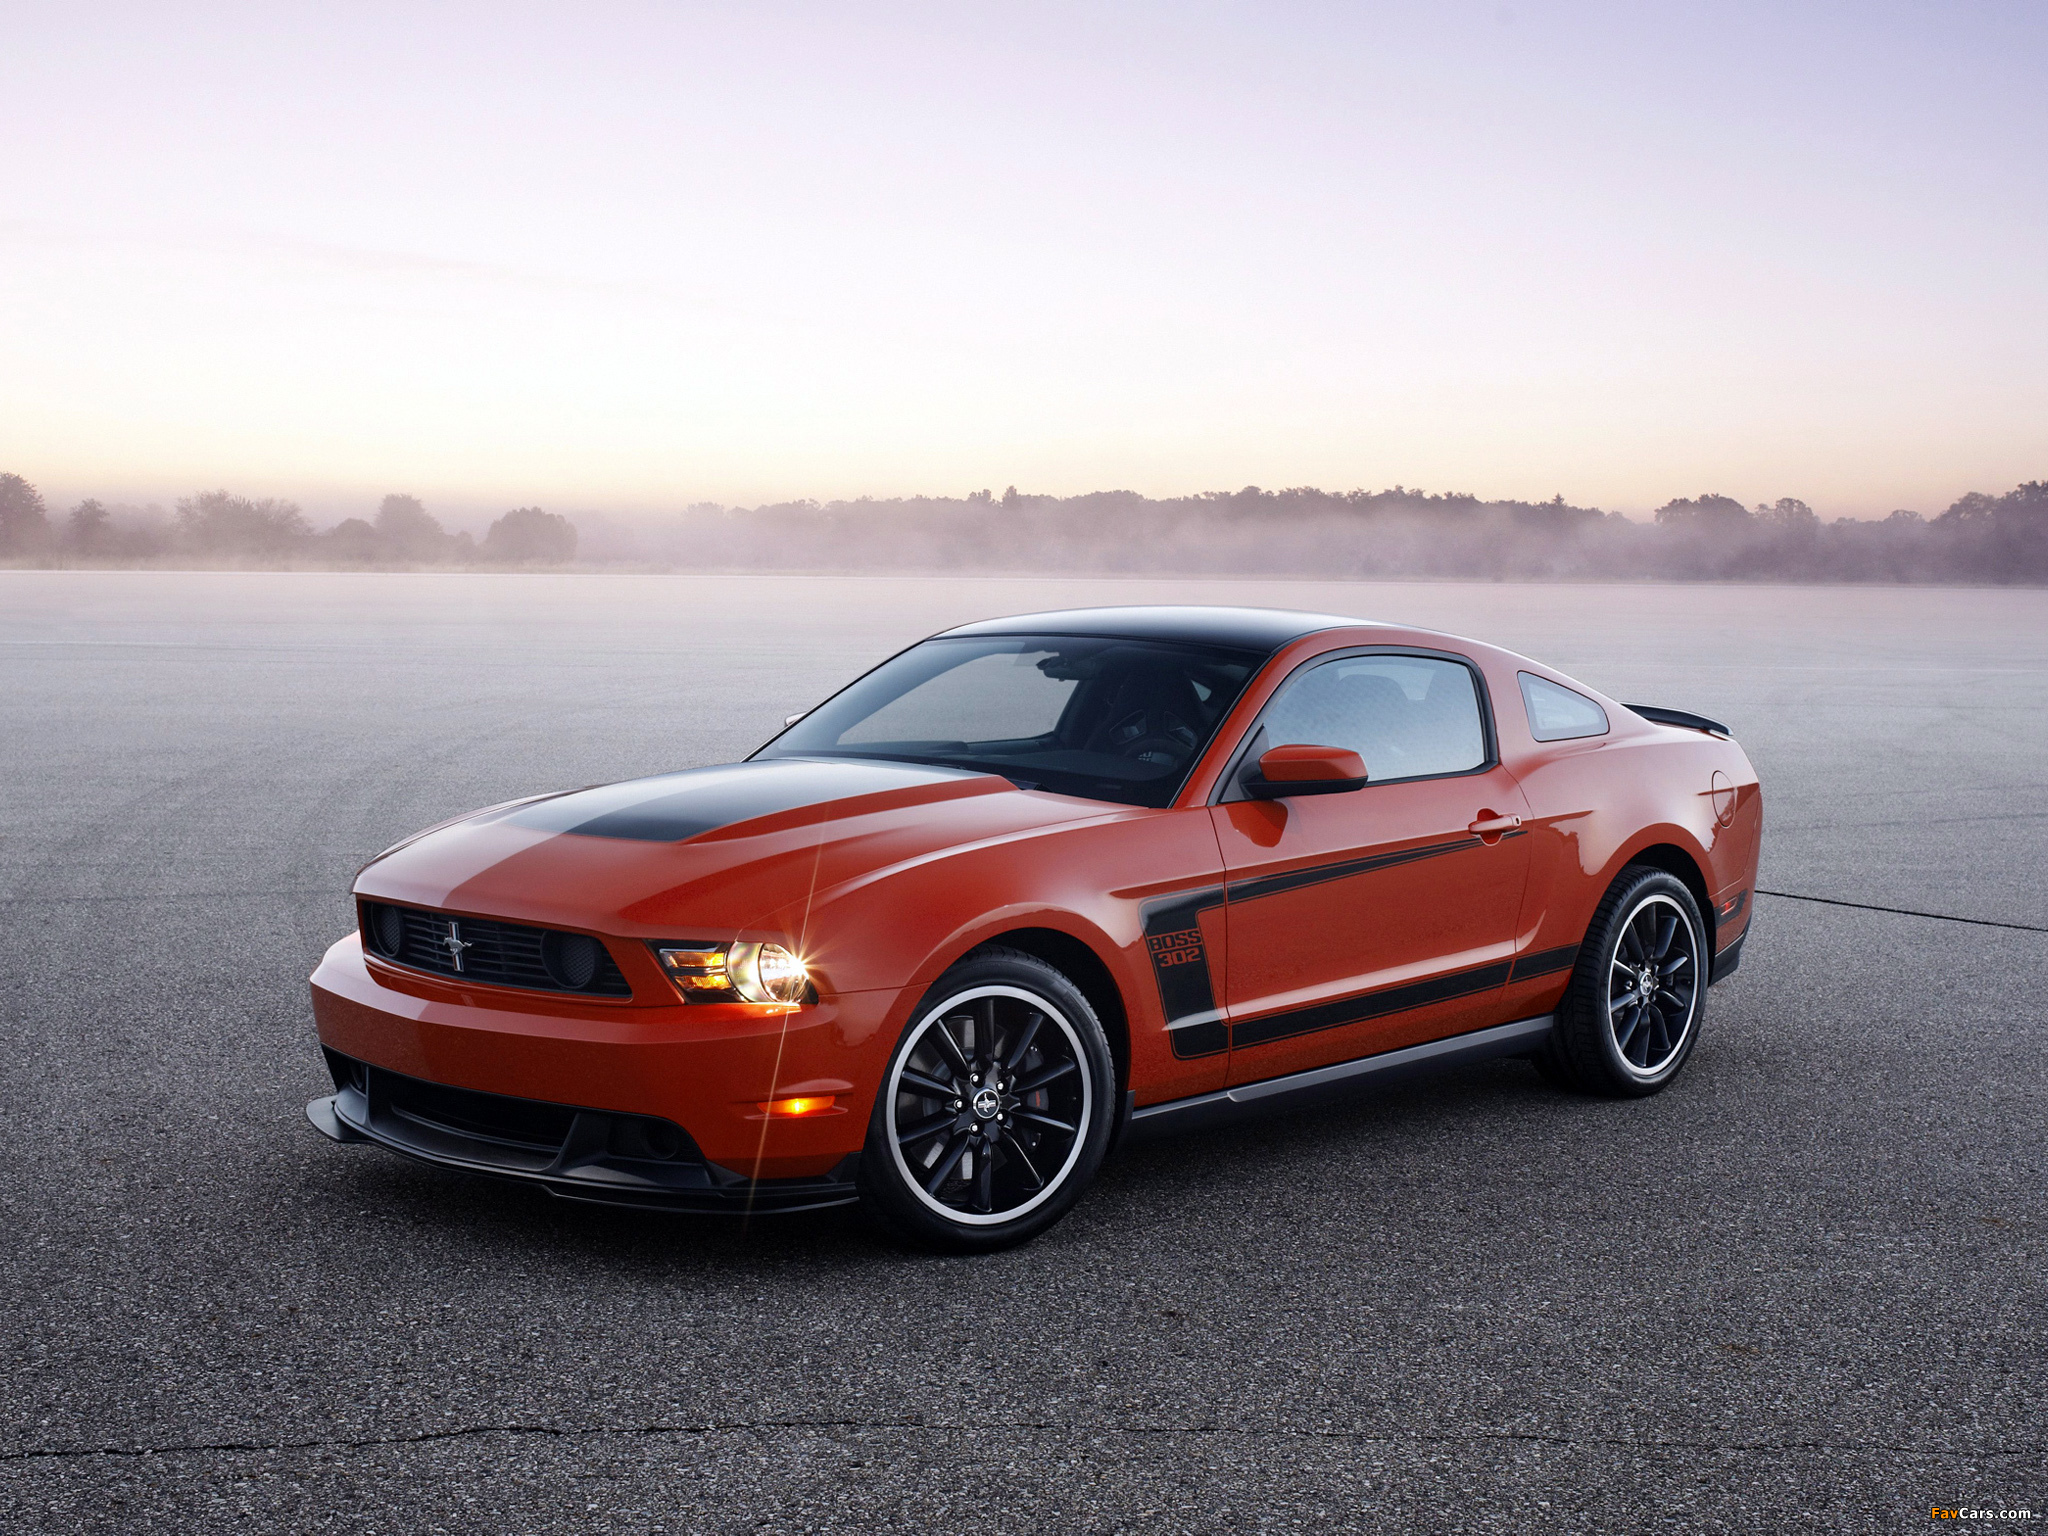 2015 Ford Mustang: Build and Price | Ford - Ford Motor Company